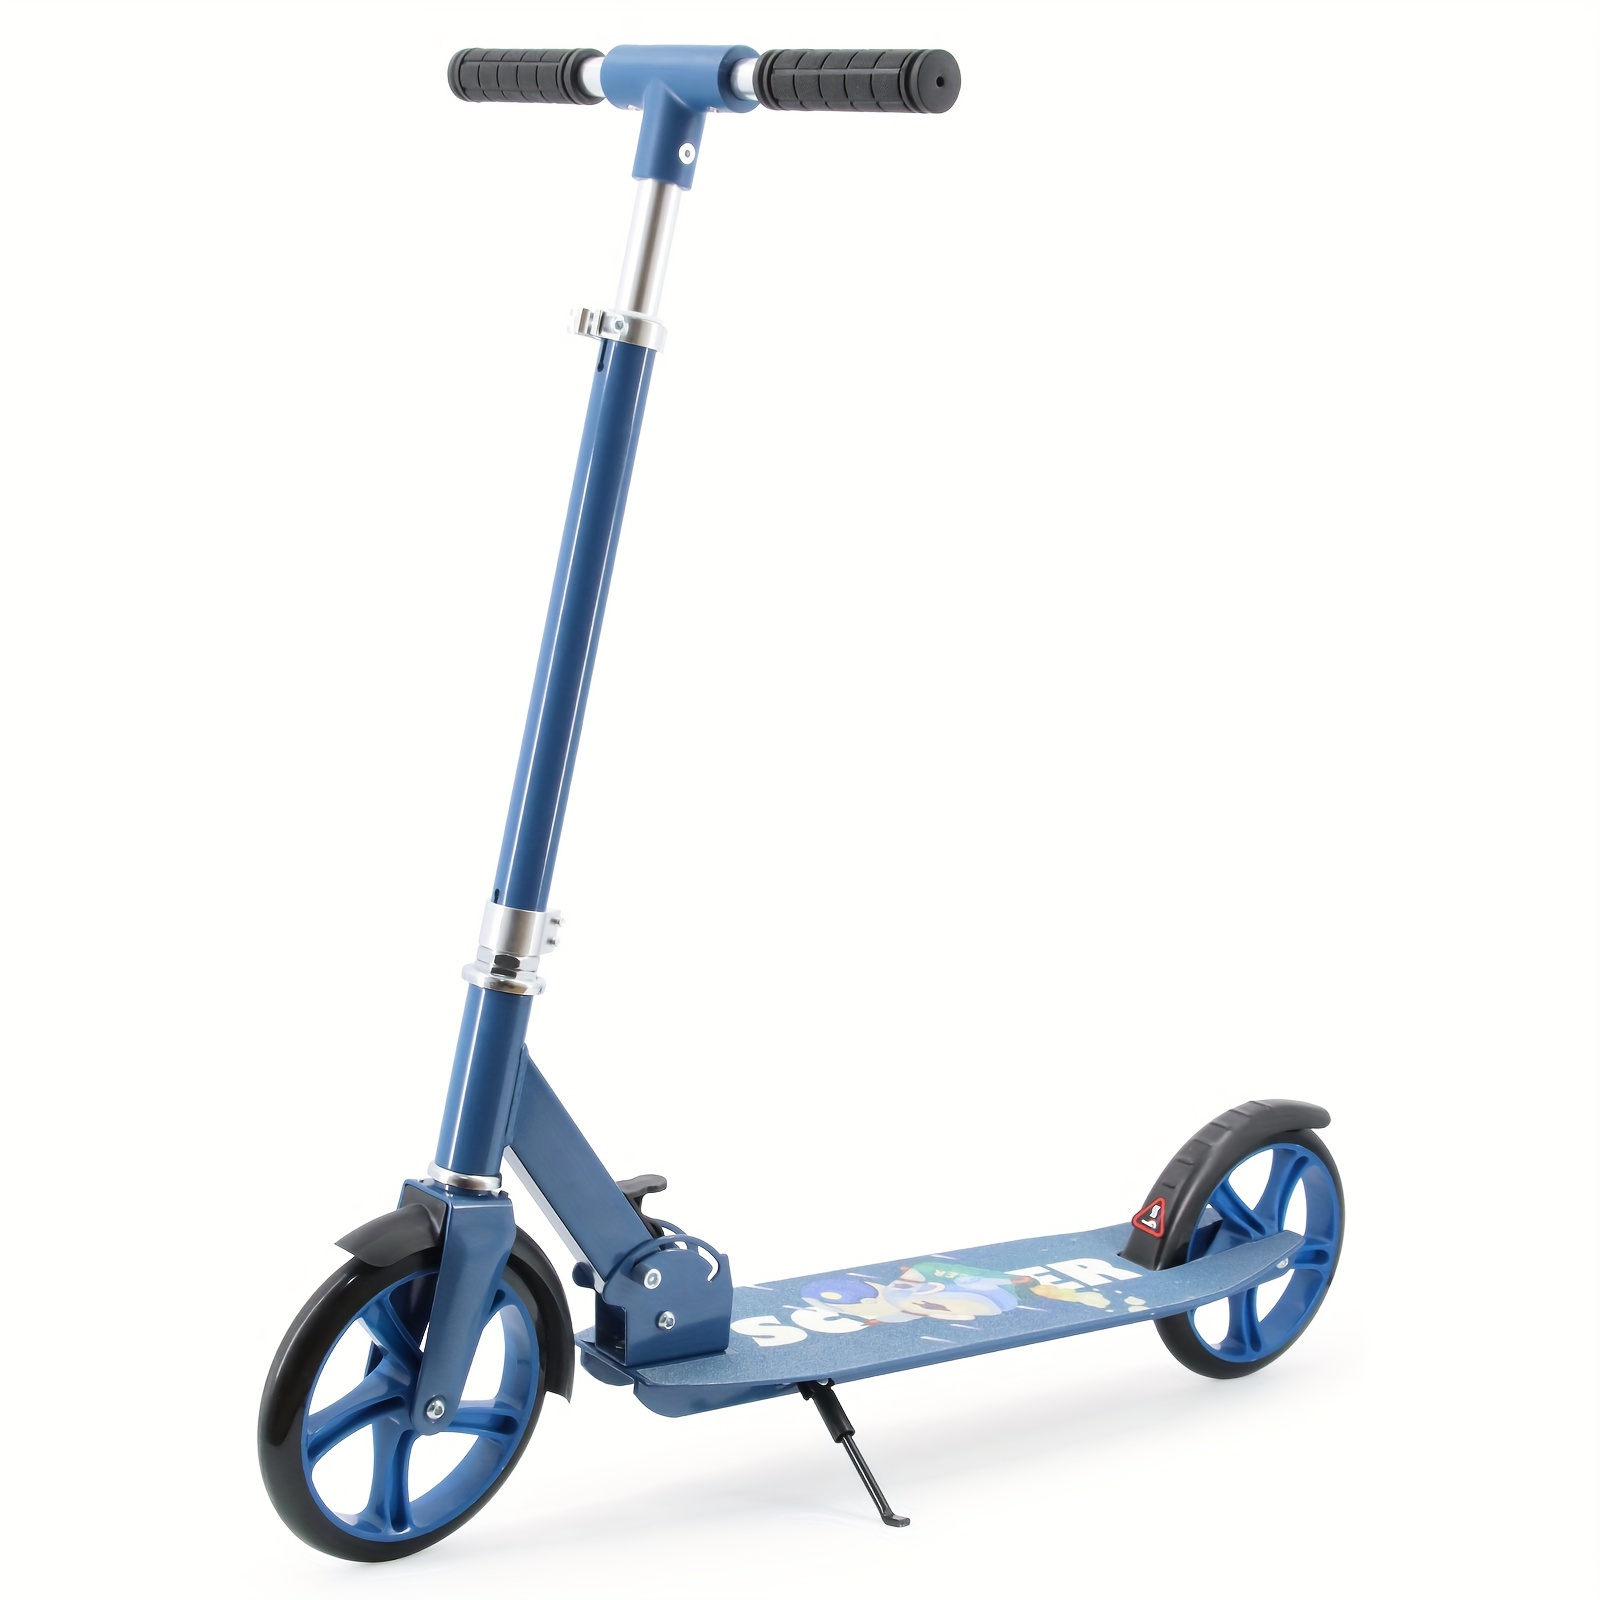 

Adult Daily Travel Scooter With Adjustable Height For Leisure Transportation